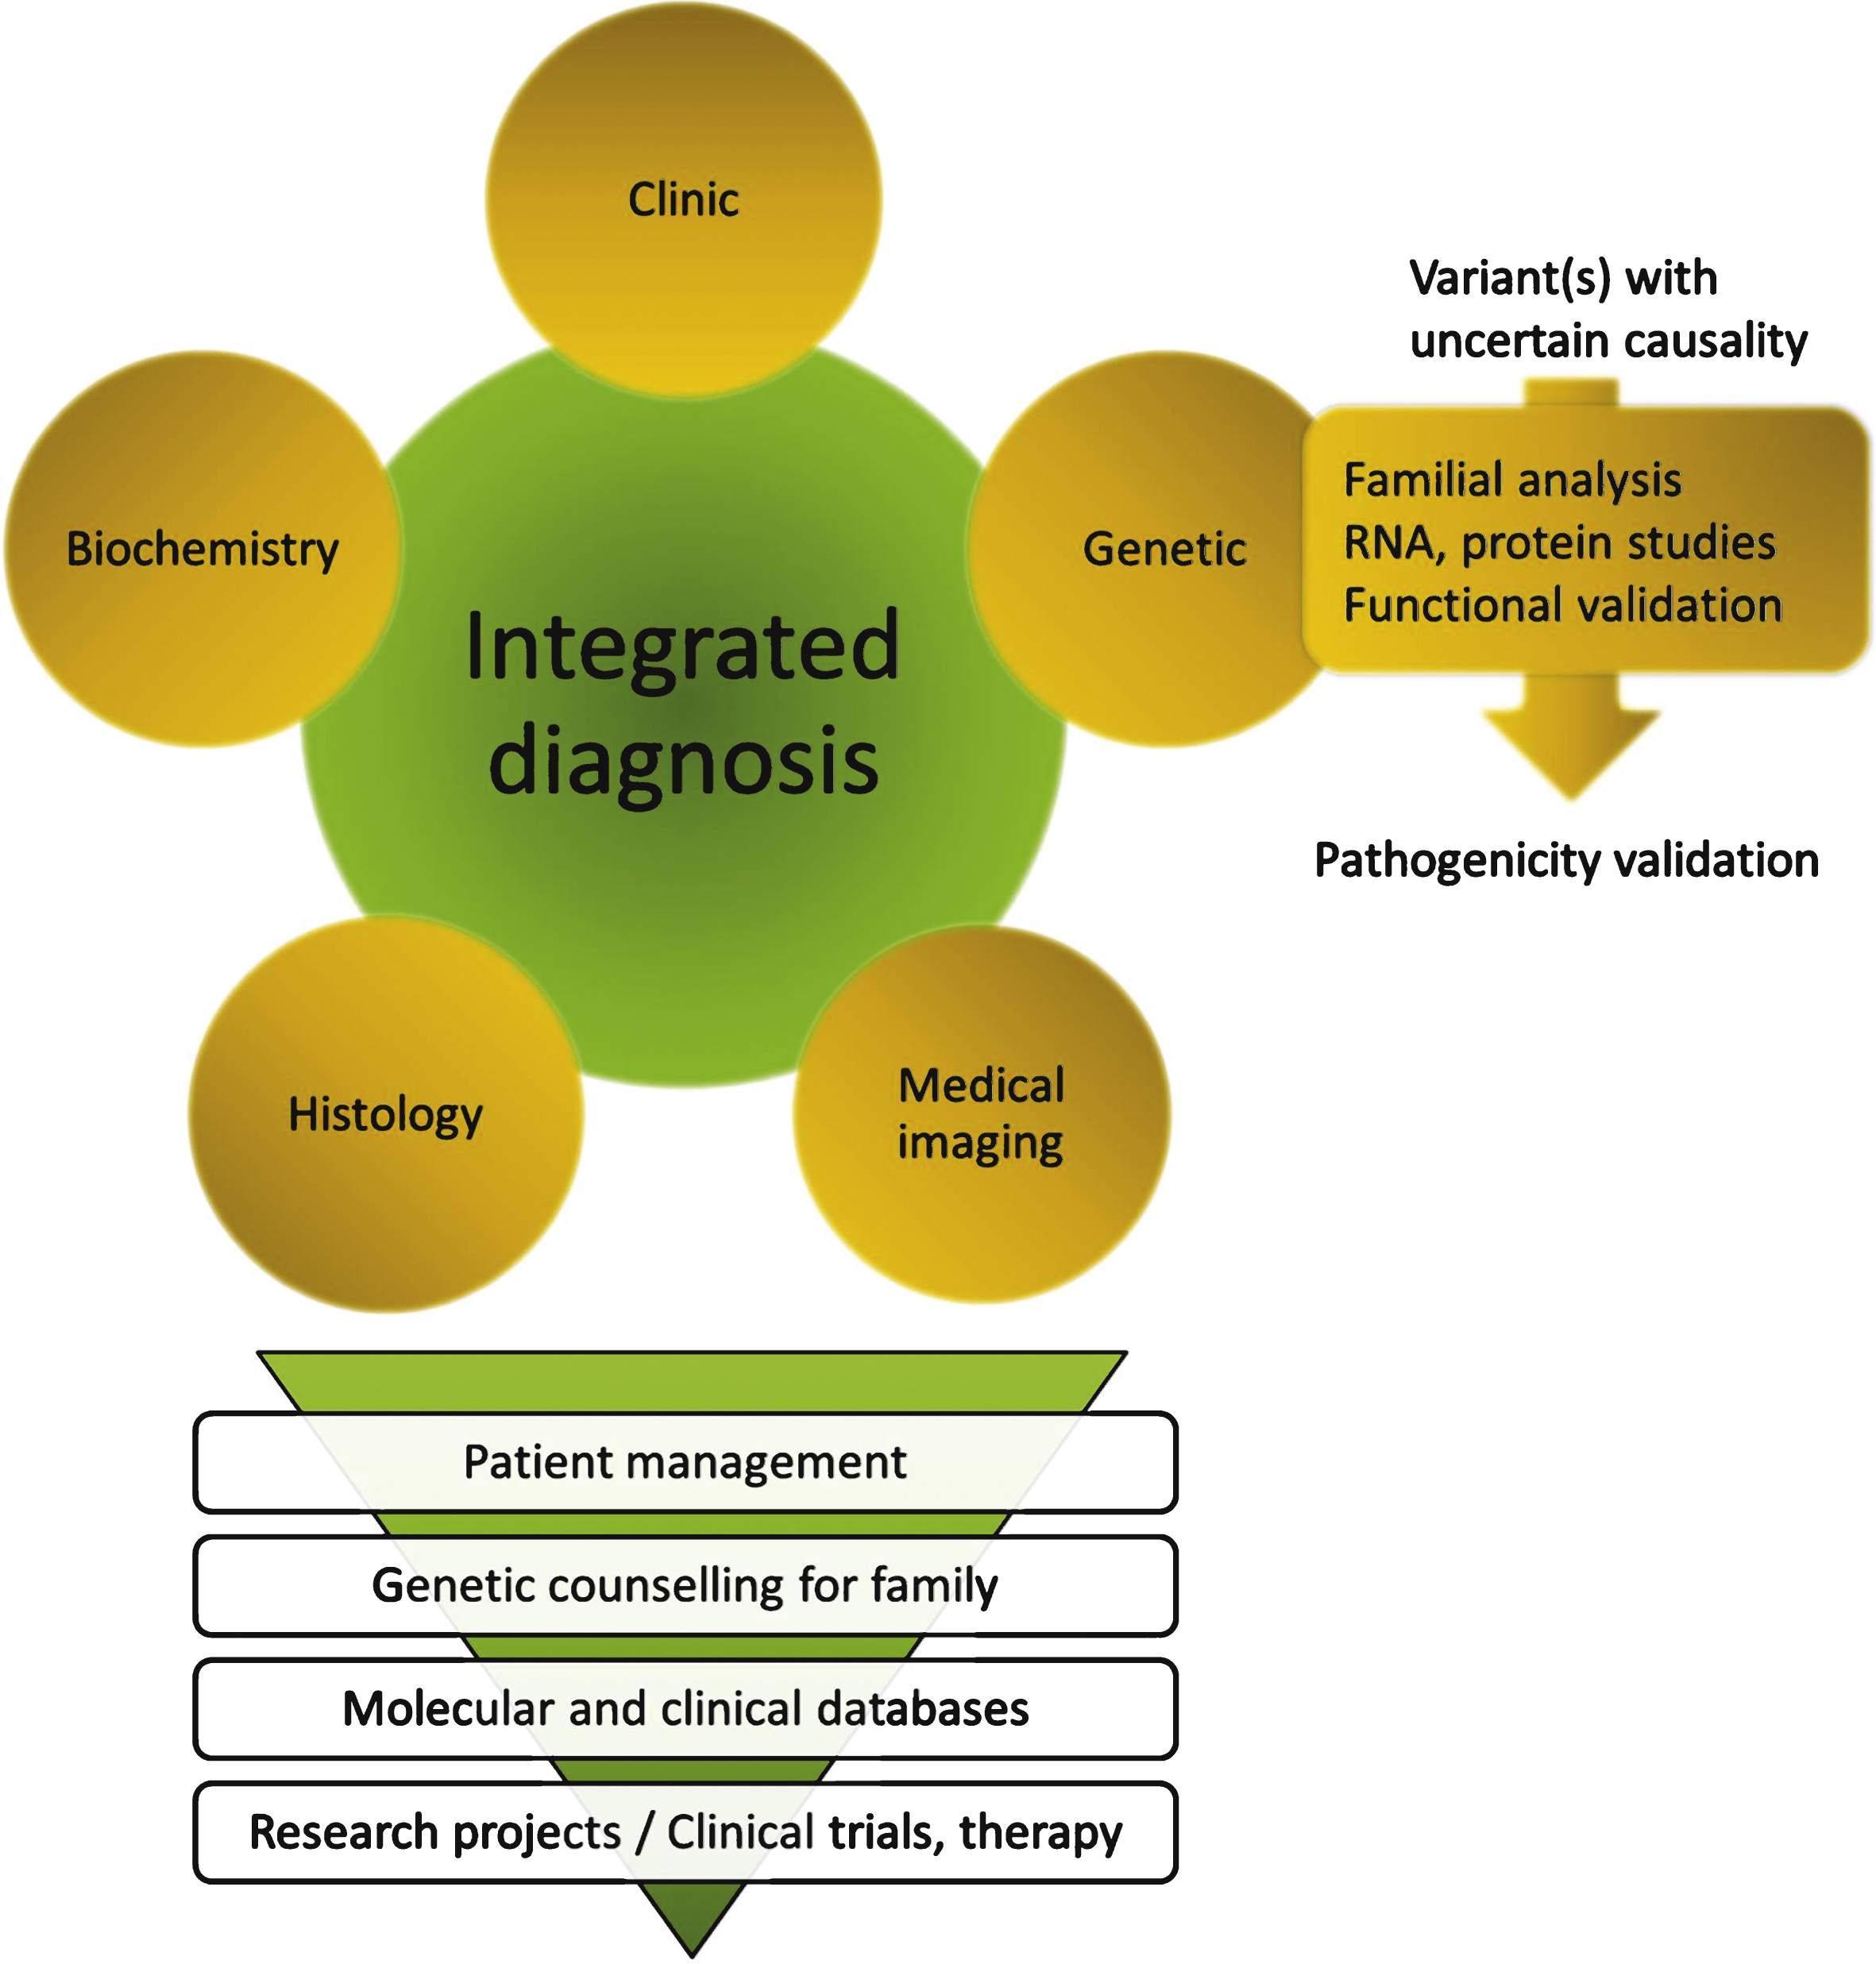 Close integration of clinical, biochemical, medical imaging, histopathological and genetic data for an integrated diagnosis. The whole process implies a great expertise in each disease/gene and in particular may require an expert molecular laboratory for final interpretation of sequence variants. The diagnosis may result in specific patient management including potential existing therapies, and should allow in any case genetic counselling within the family (carrier, predictive, prenatal or pre-implantation testing). Inclusion of data into molecular and clinical databases is a pre-requisite for patients recruitment in clinical trials and to allow development of research projects on the disease.